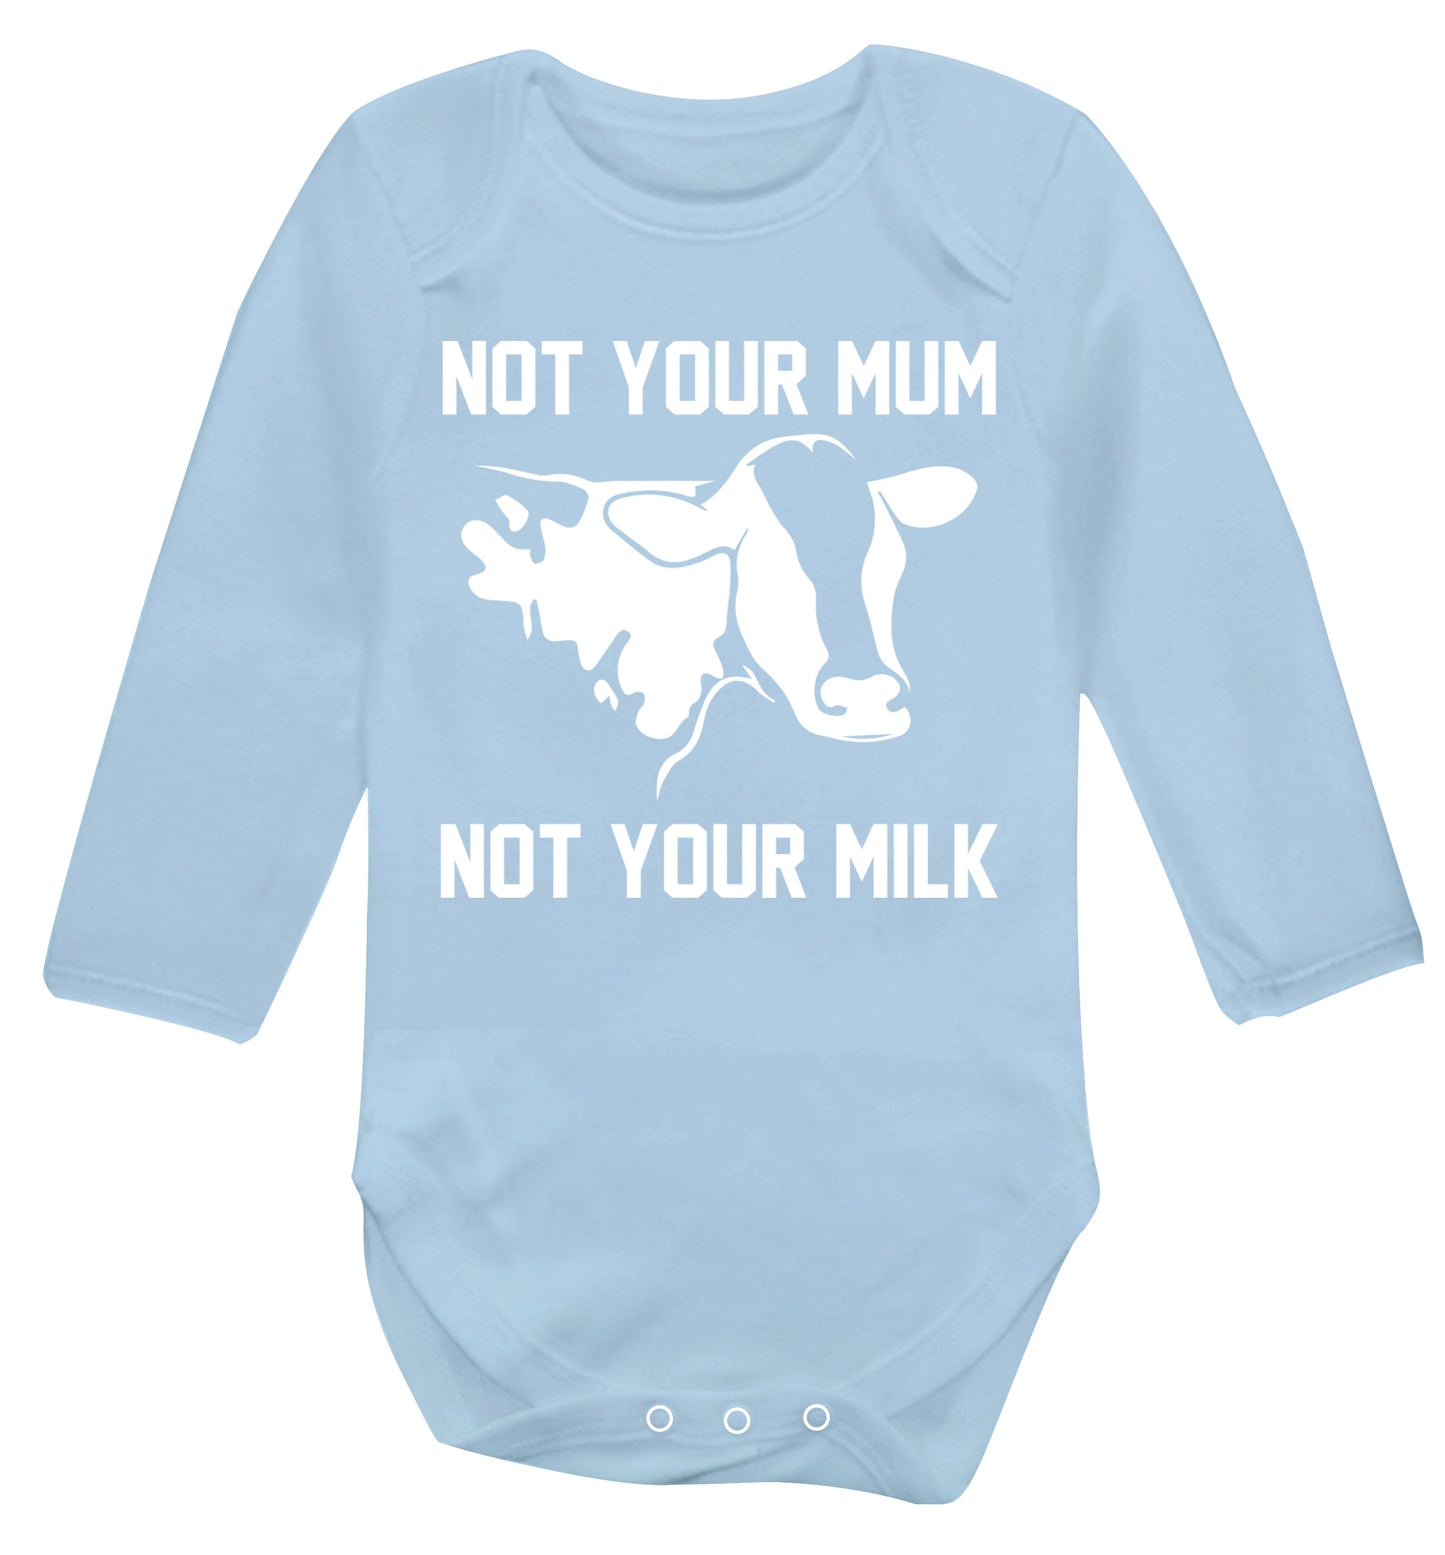 Not your mum not your milk Baby Vest long sleeved pale blue 6-12 months